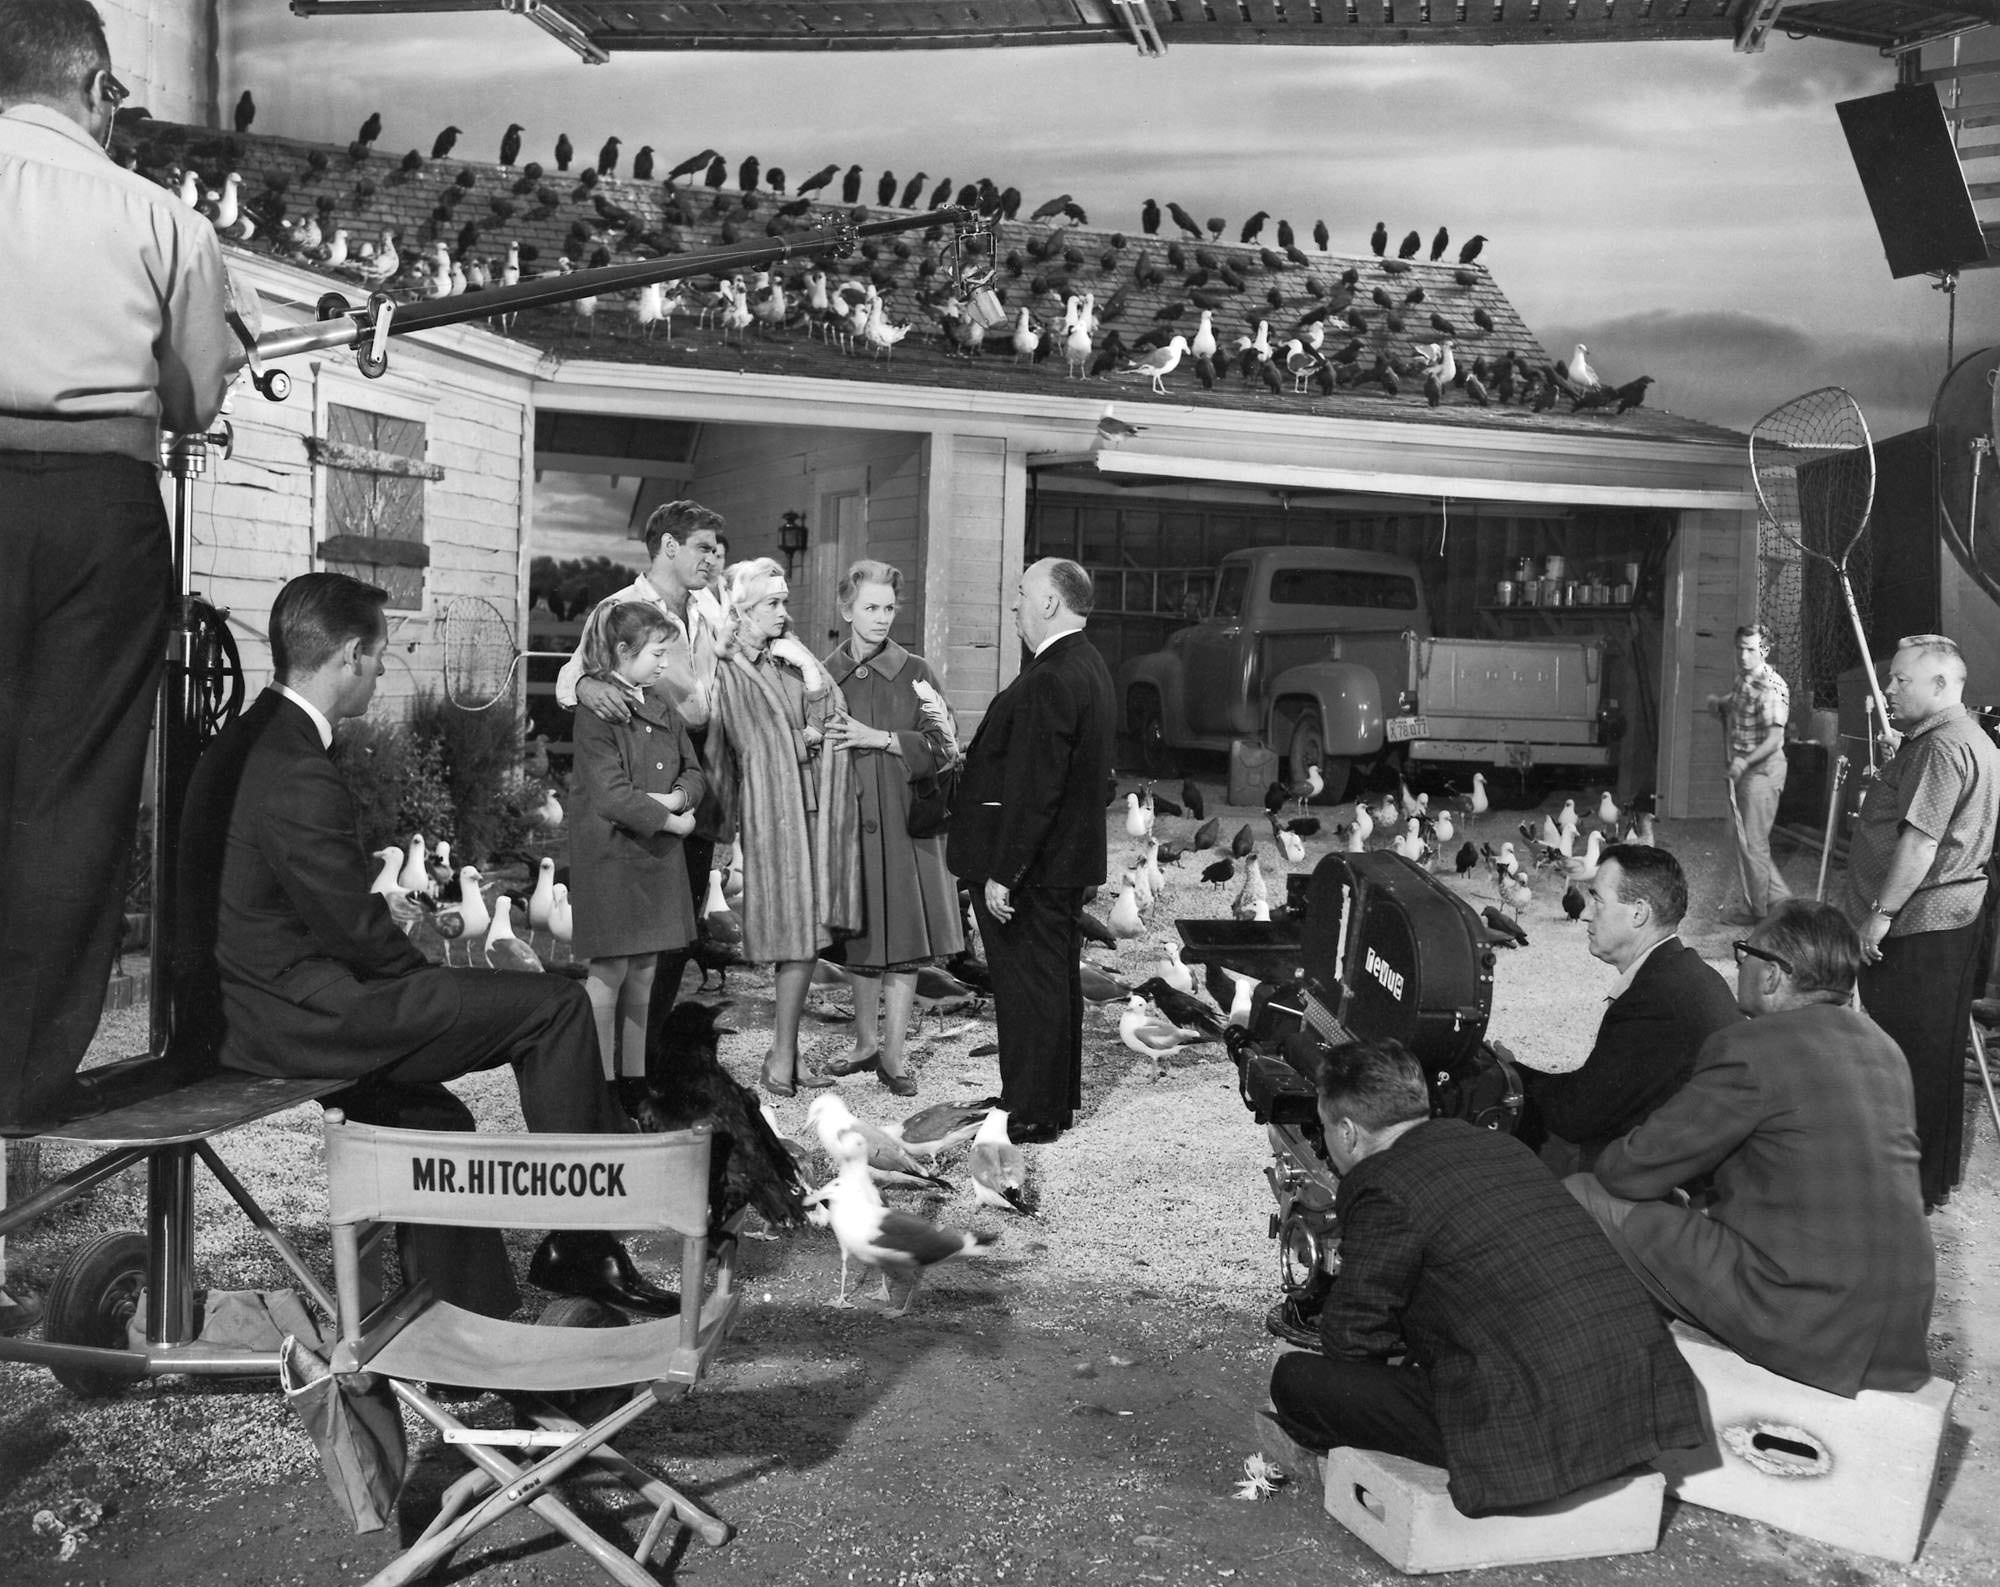 Director Alfred Hitchcock on set during the filming of "The Birds", 1962